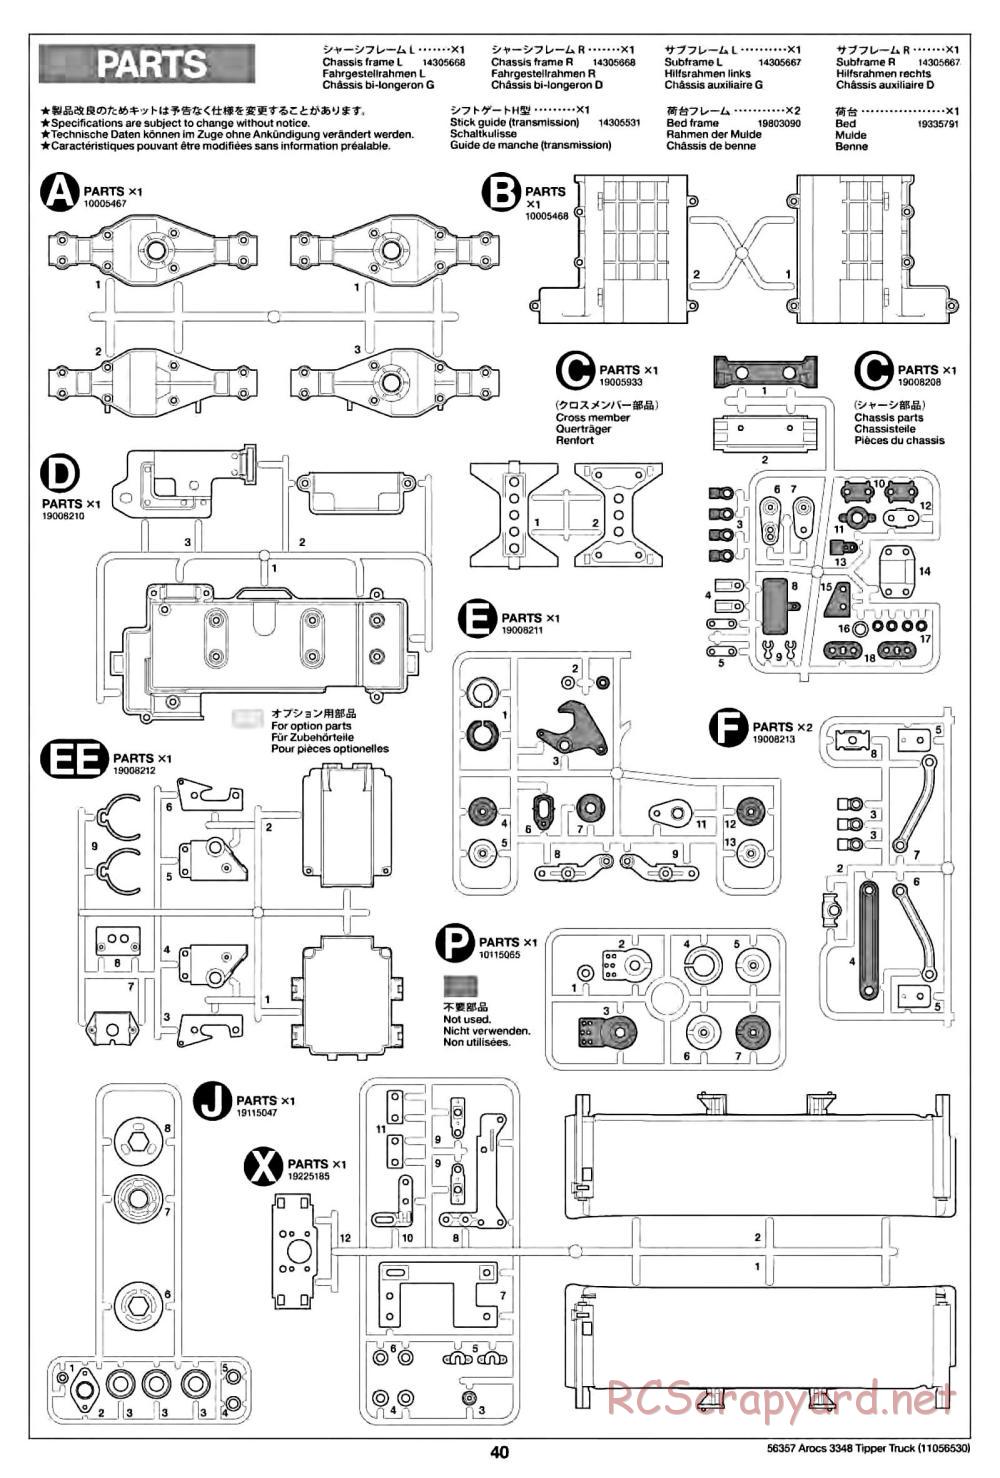 Tamiya - Mercedes-Benz Arocs 3348 6x4 Tipper Truck Chassis - Manual - Page 40